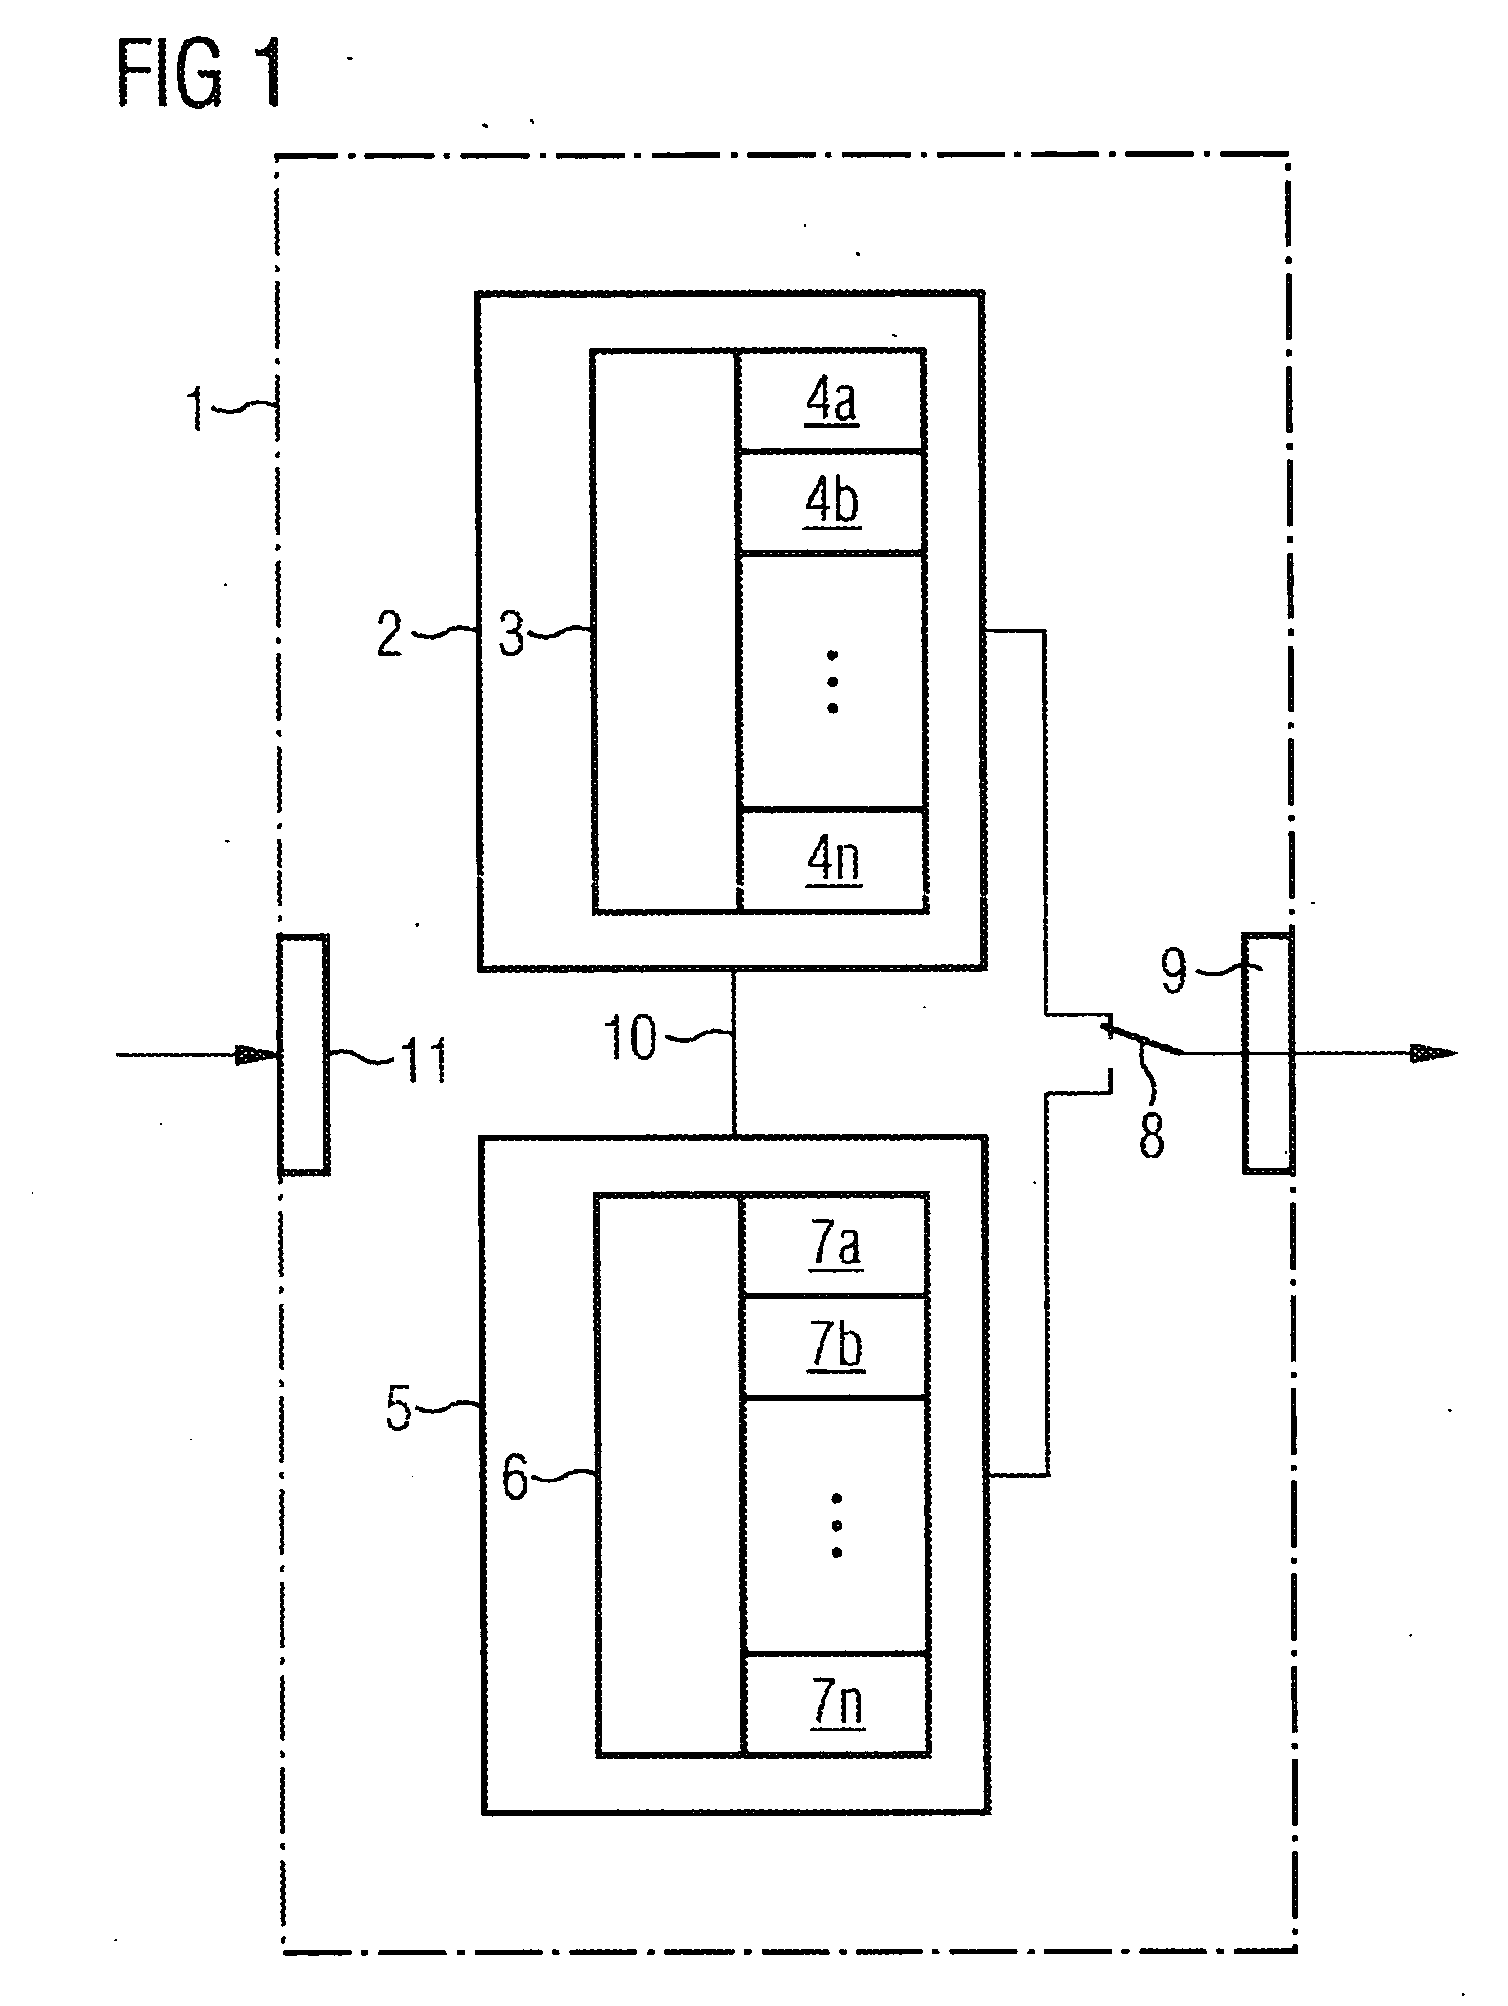 Method for synchronizing two control devices, and redundantly designed automation system